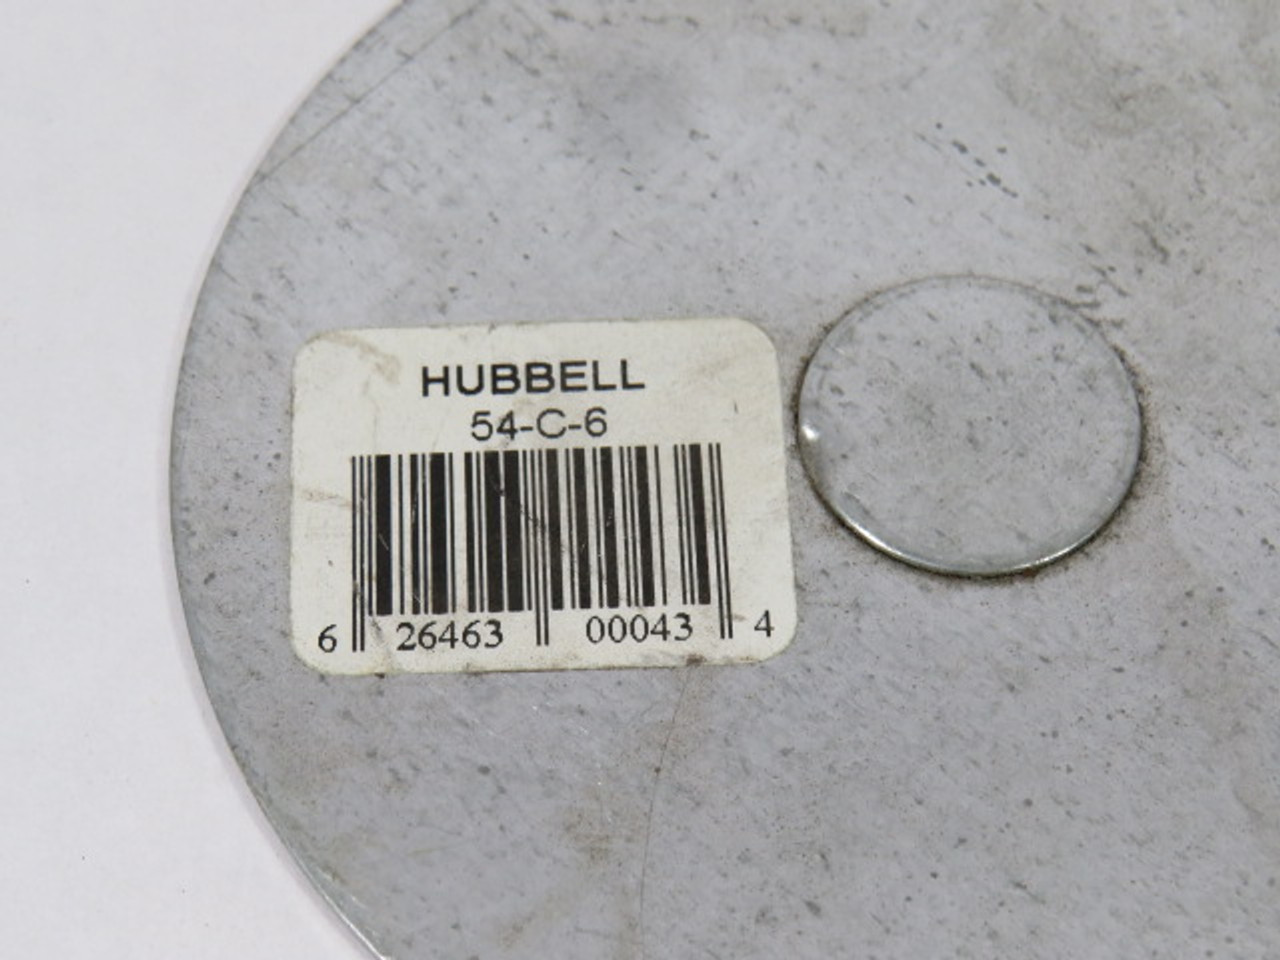 Hubbell 54-C-6 4" Round Receptacle Box Cover USED